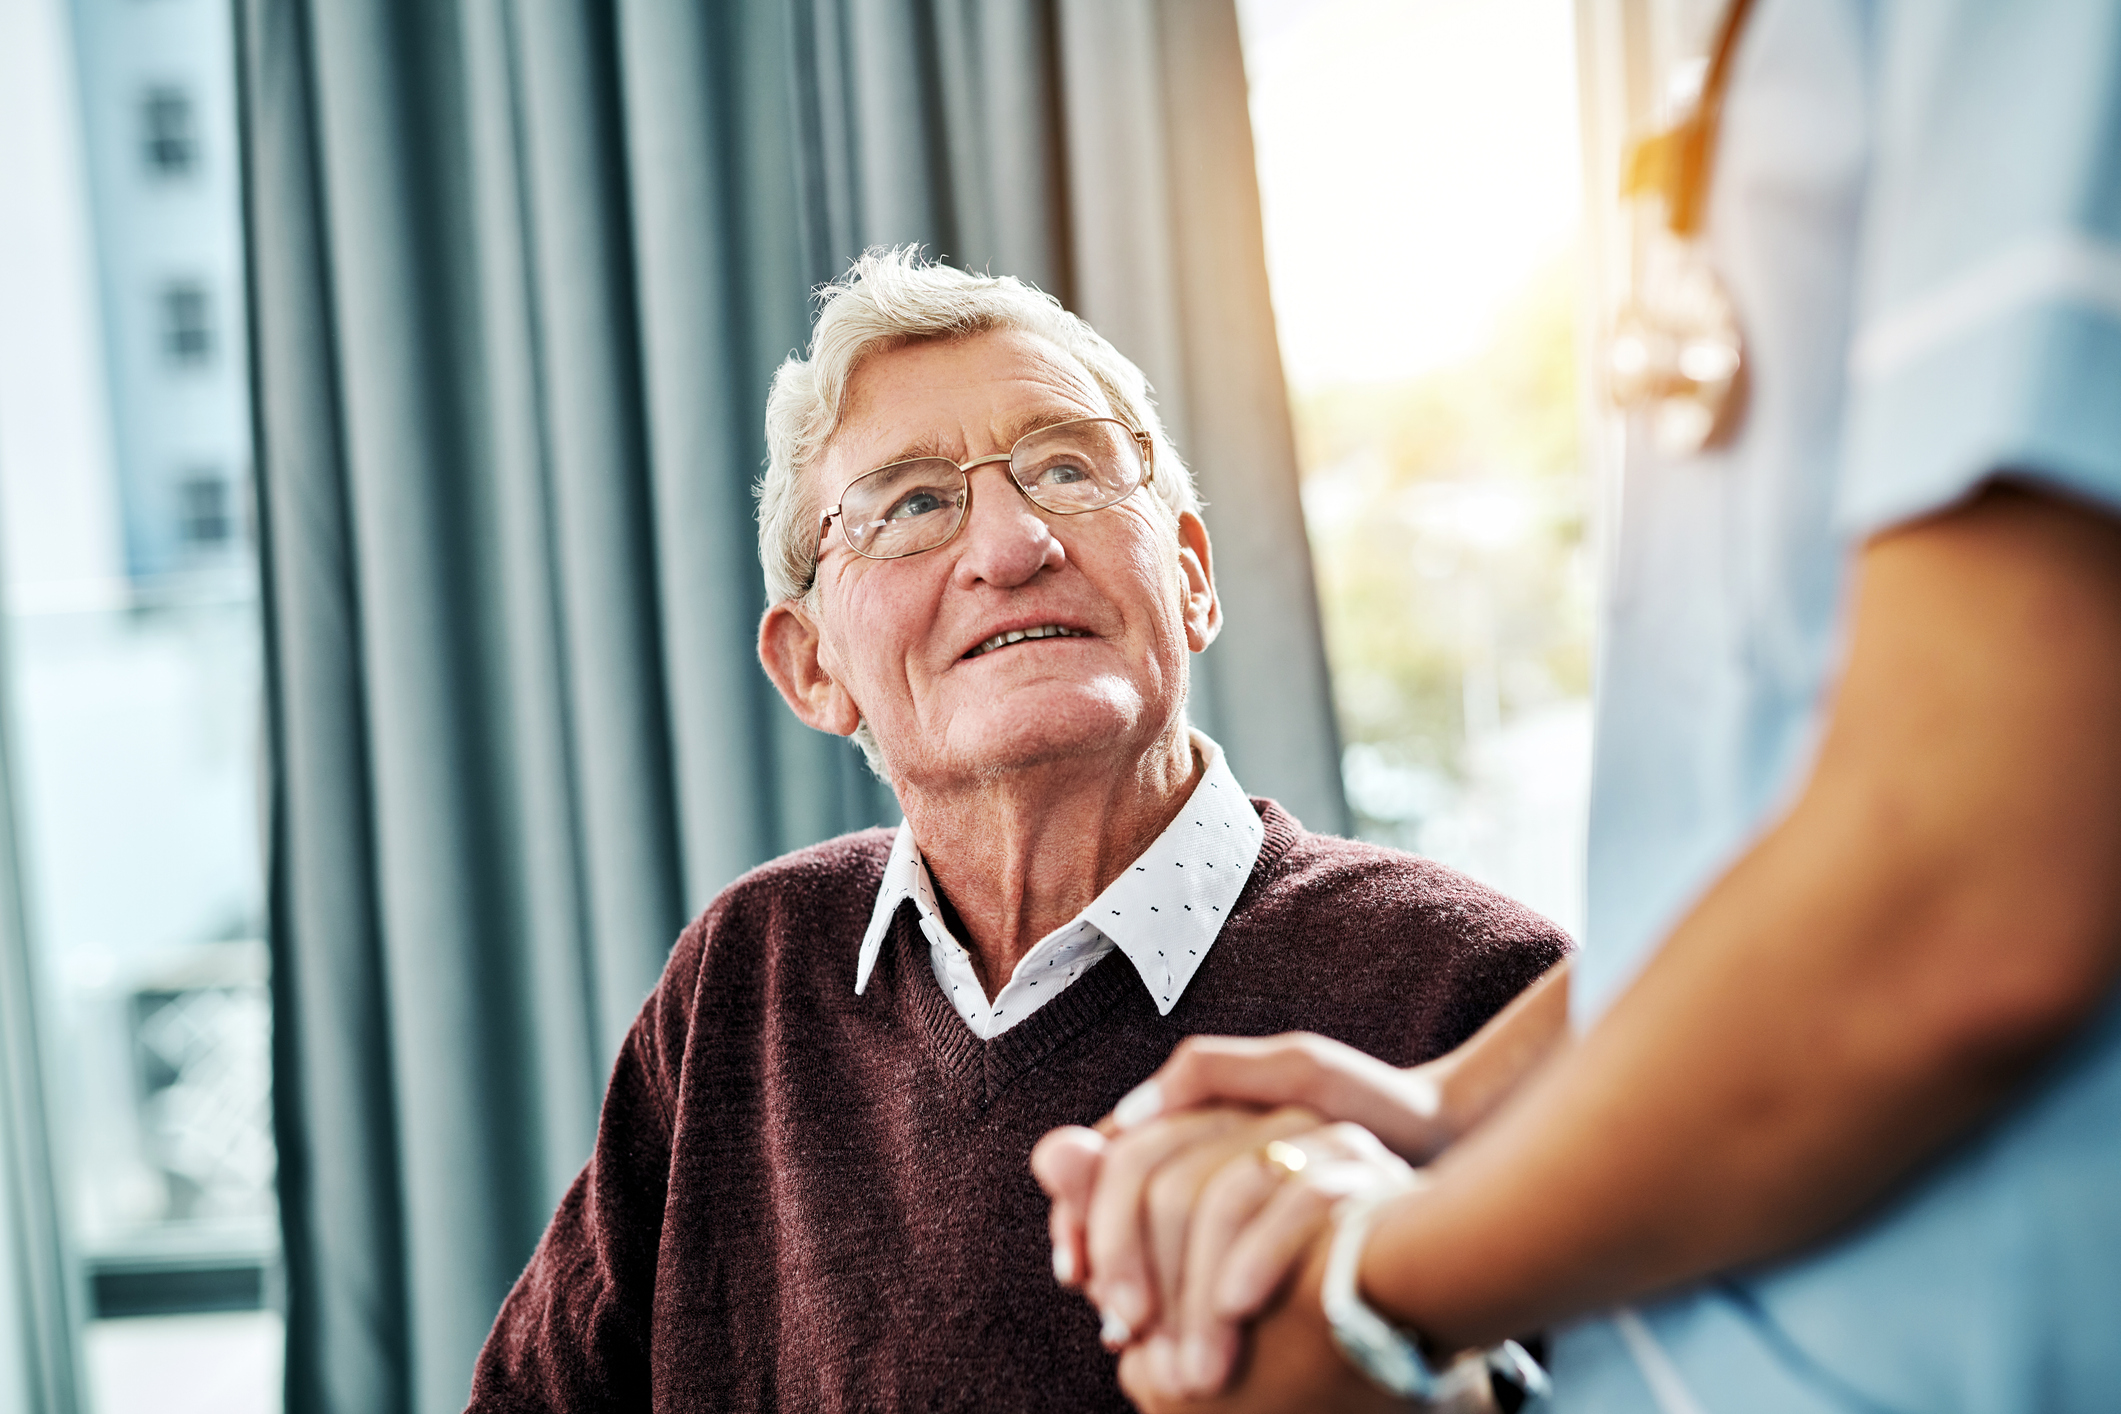 Recovering at home: A stroke client’s journey with Cavendish Homecare